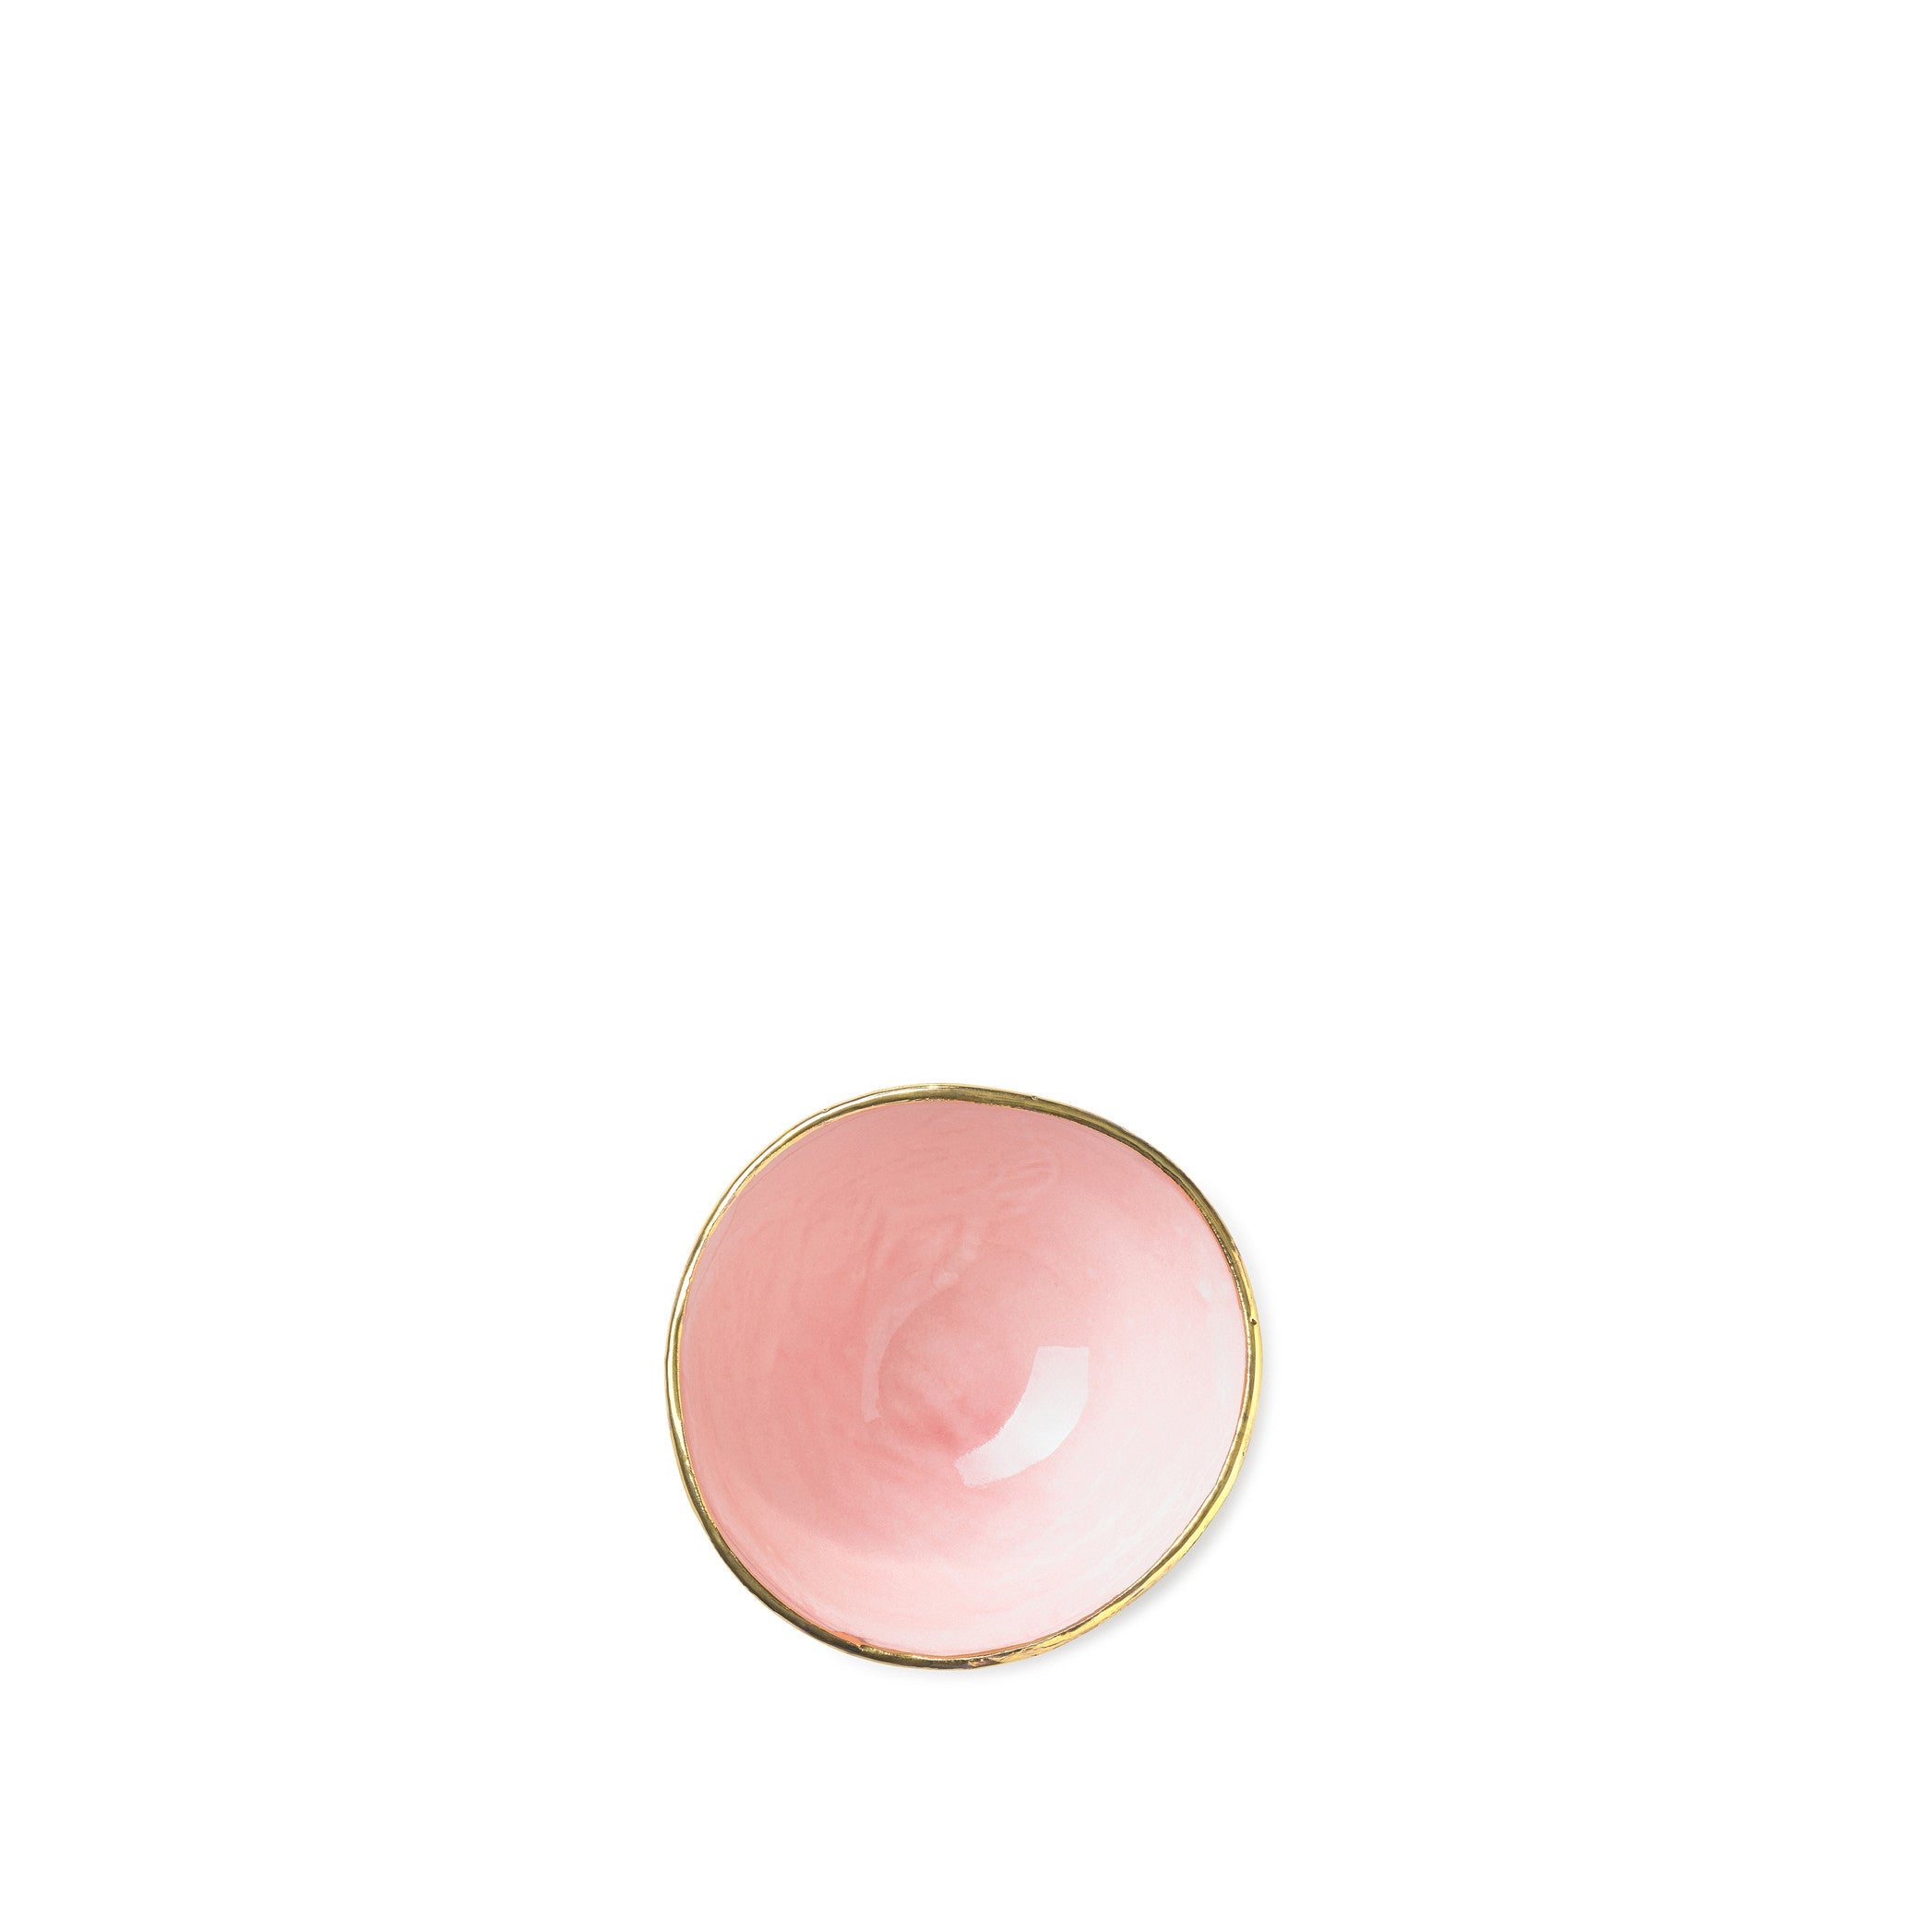 Small Pink Ceramic Bowl with Gold Rim, 6cm